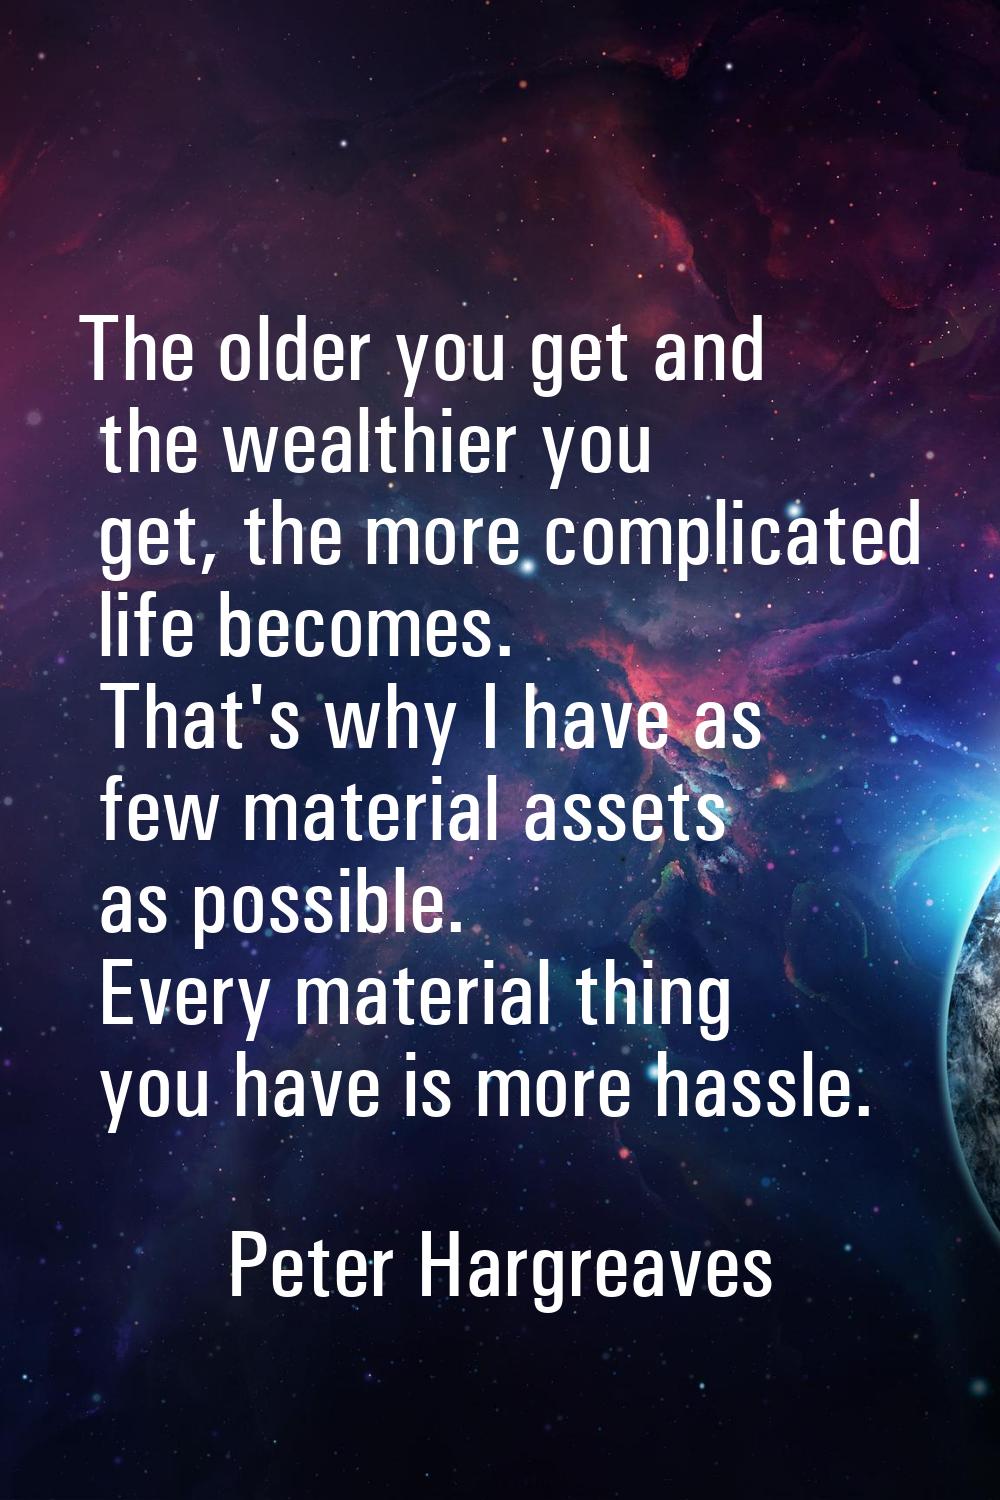 The older you get and the wealthier you get, the more complicated life becomes. That's why I have a